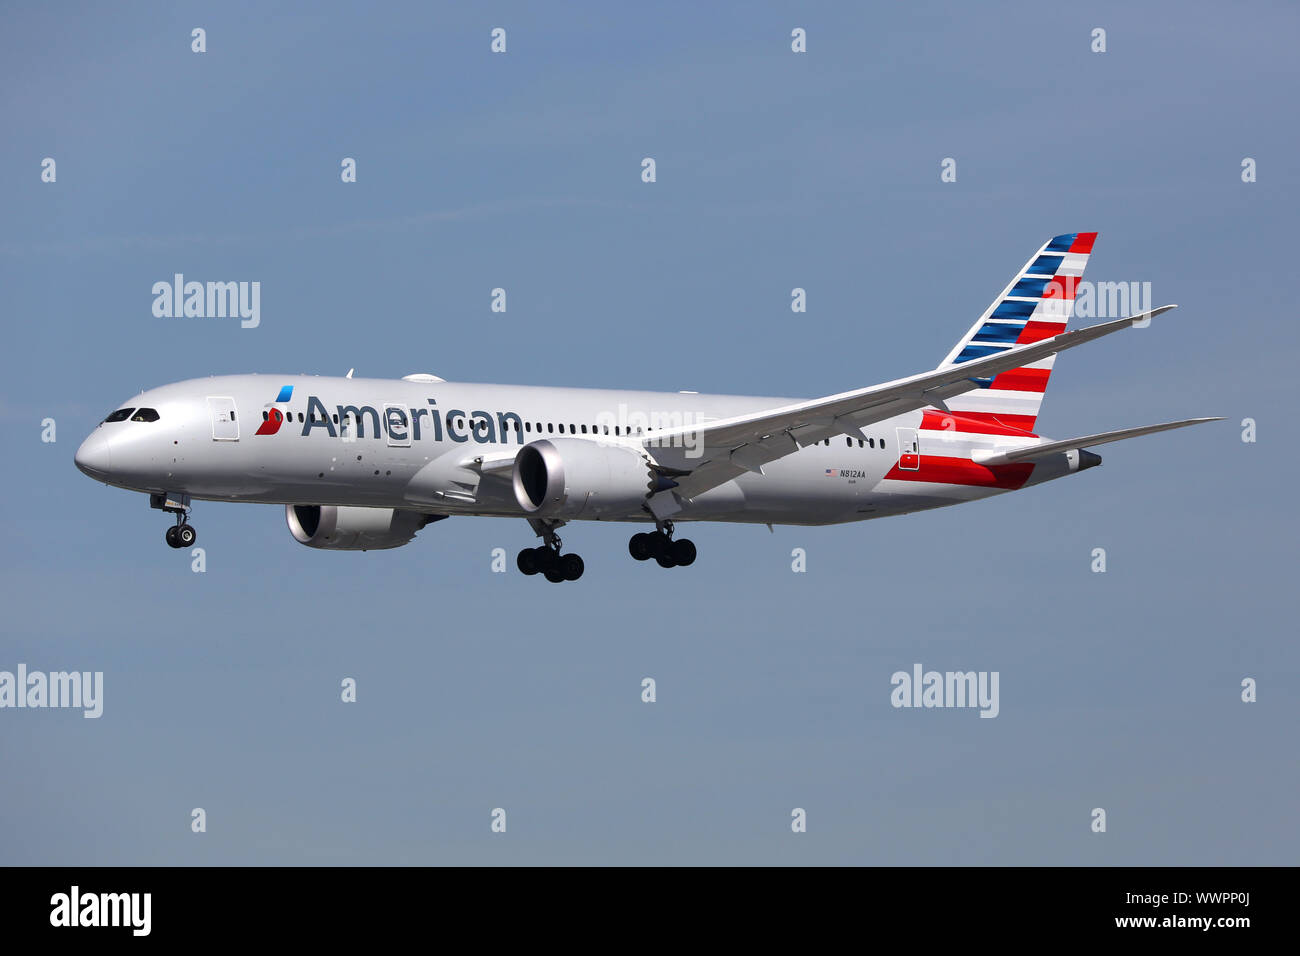 American Airlines Boeing 787 Dreamliner Avion Los Angeles Airport Banque D'Images